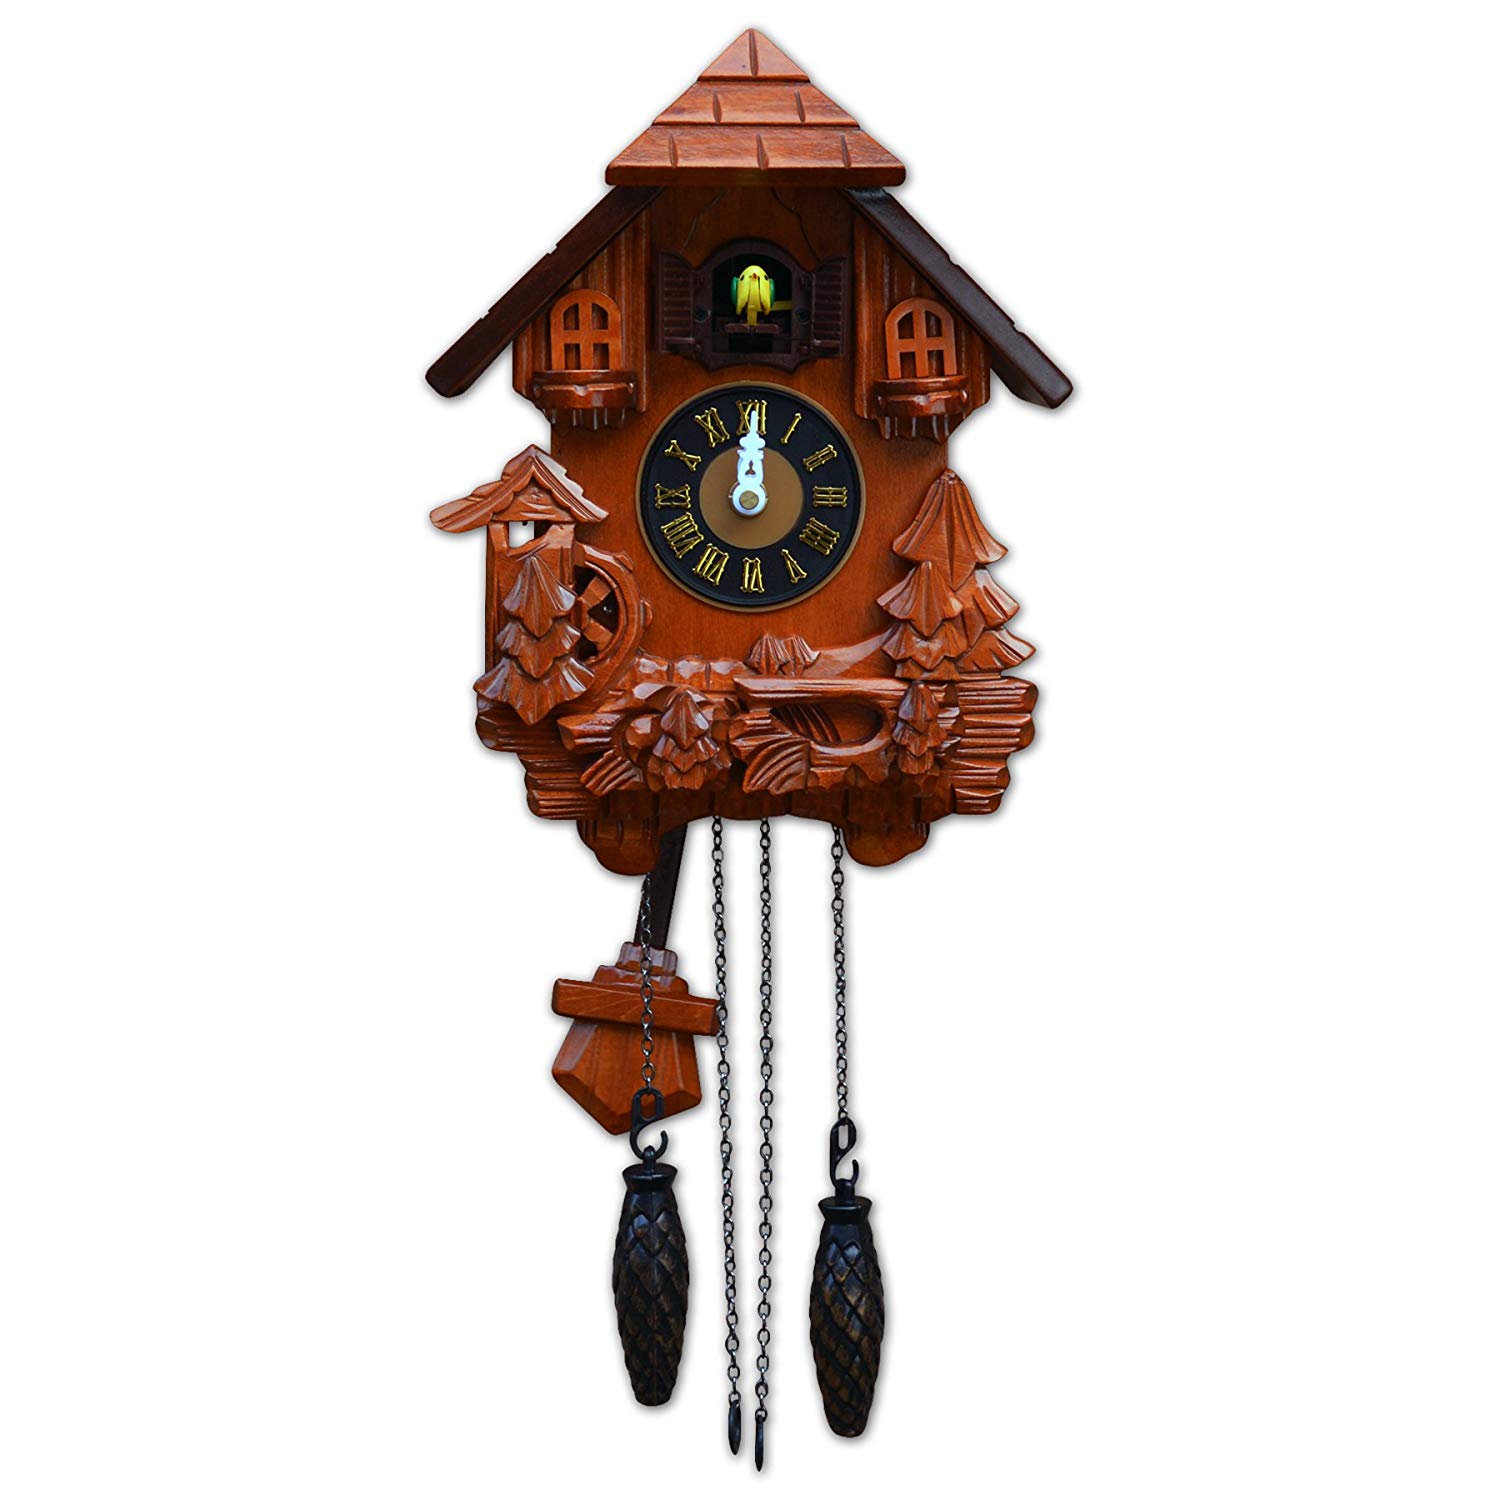 TransSino Treasures 17 inch Black Forest Quartz Cuckoo Clock with Bird Chimes The Hour.jpg  by TransSinoTreasures